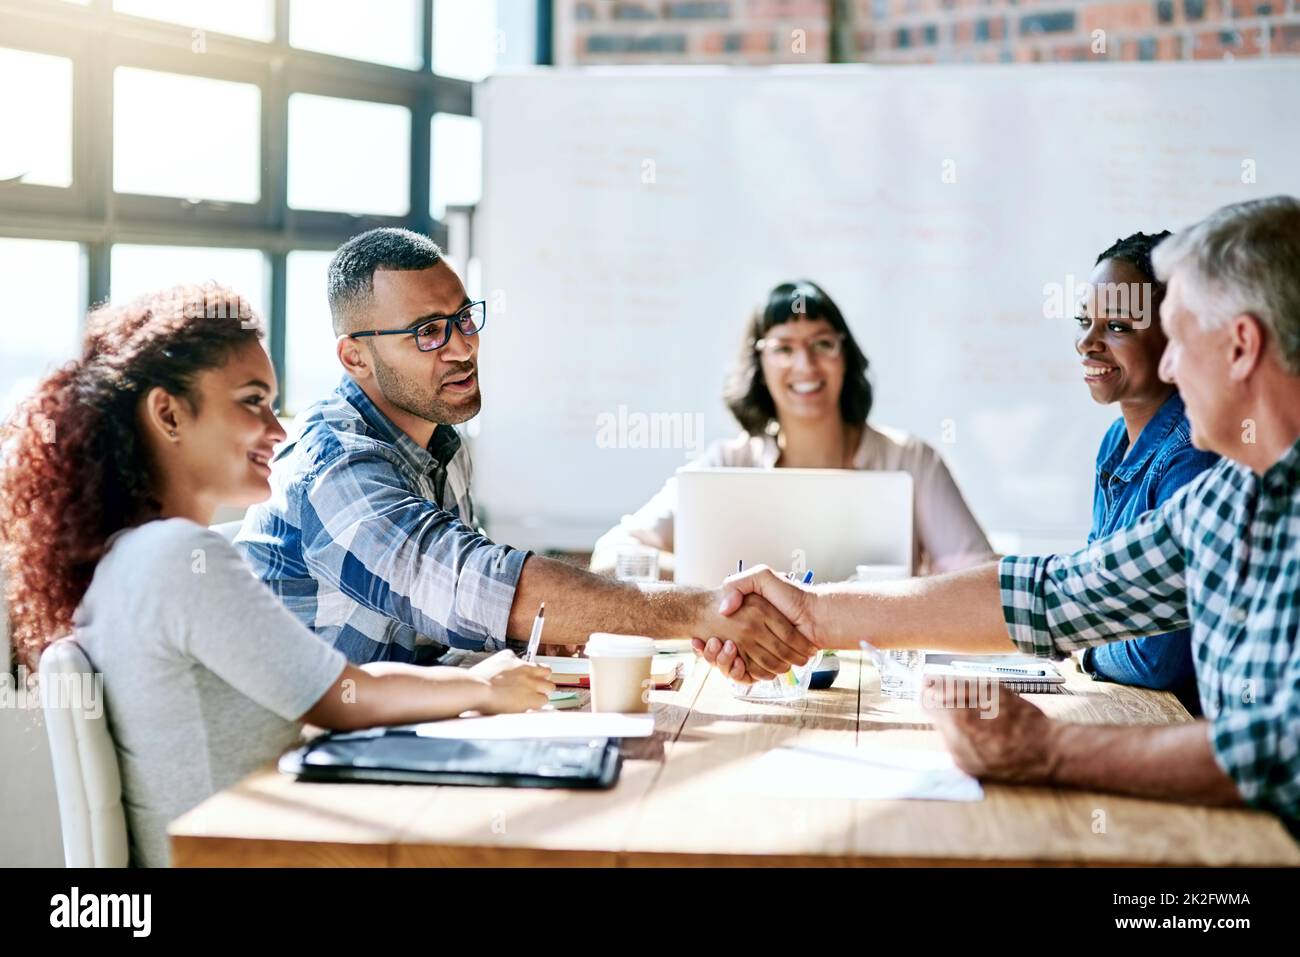 Always be ready for a challenge. Shot of a team of entrepreneurs collaborating in a modern office. Stock Photo